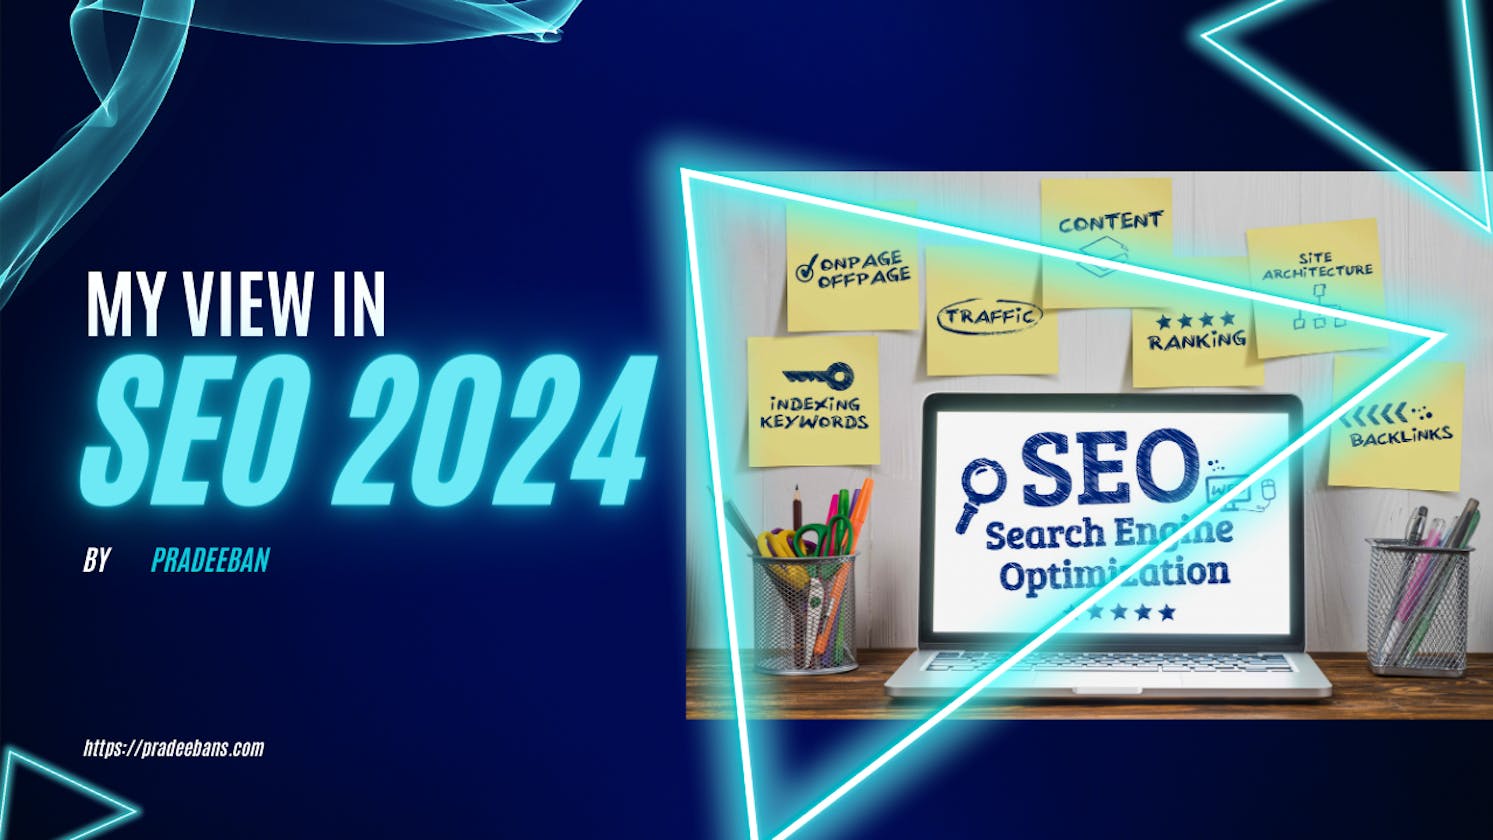 My View of SEO in 2024: Beyond Ranking, Embracing Connection